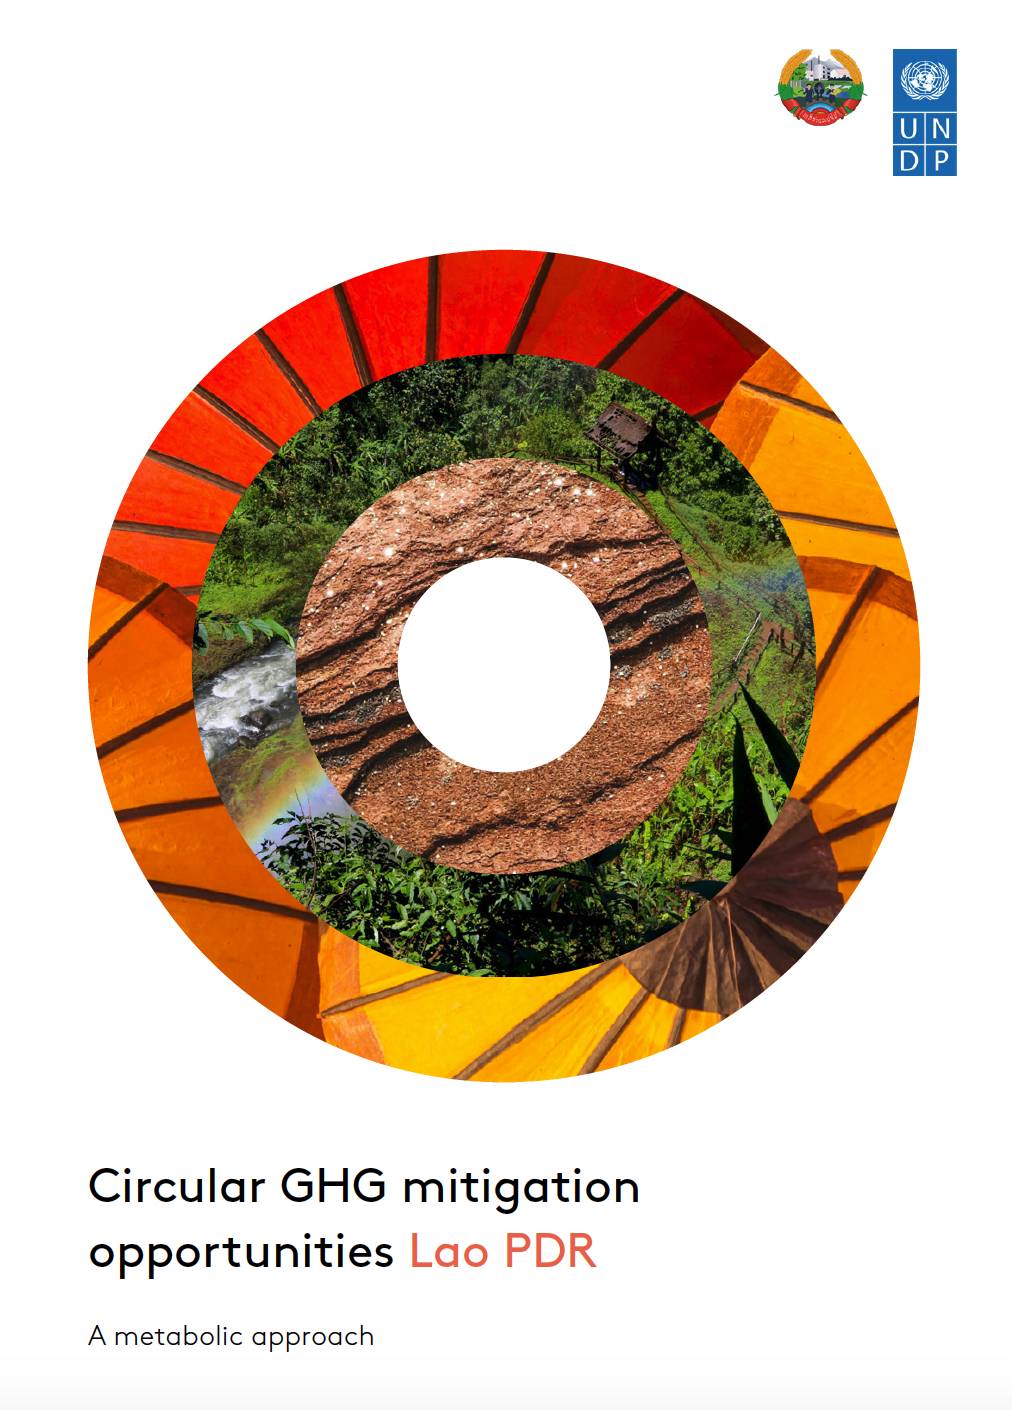 Circular GHG mitigation opportunities Lao PDR